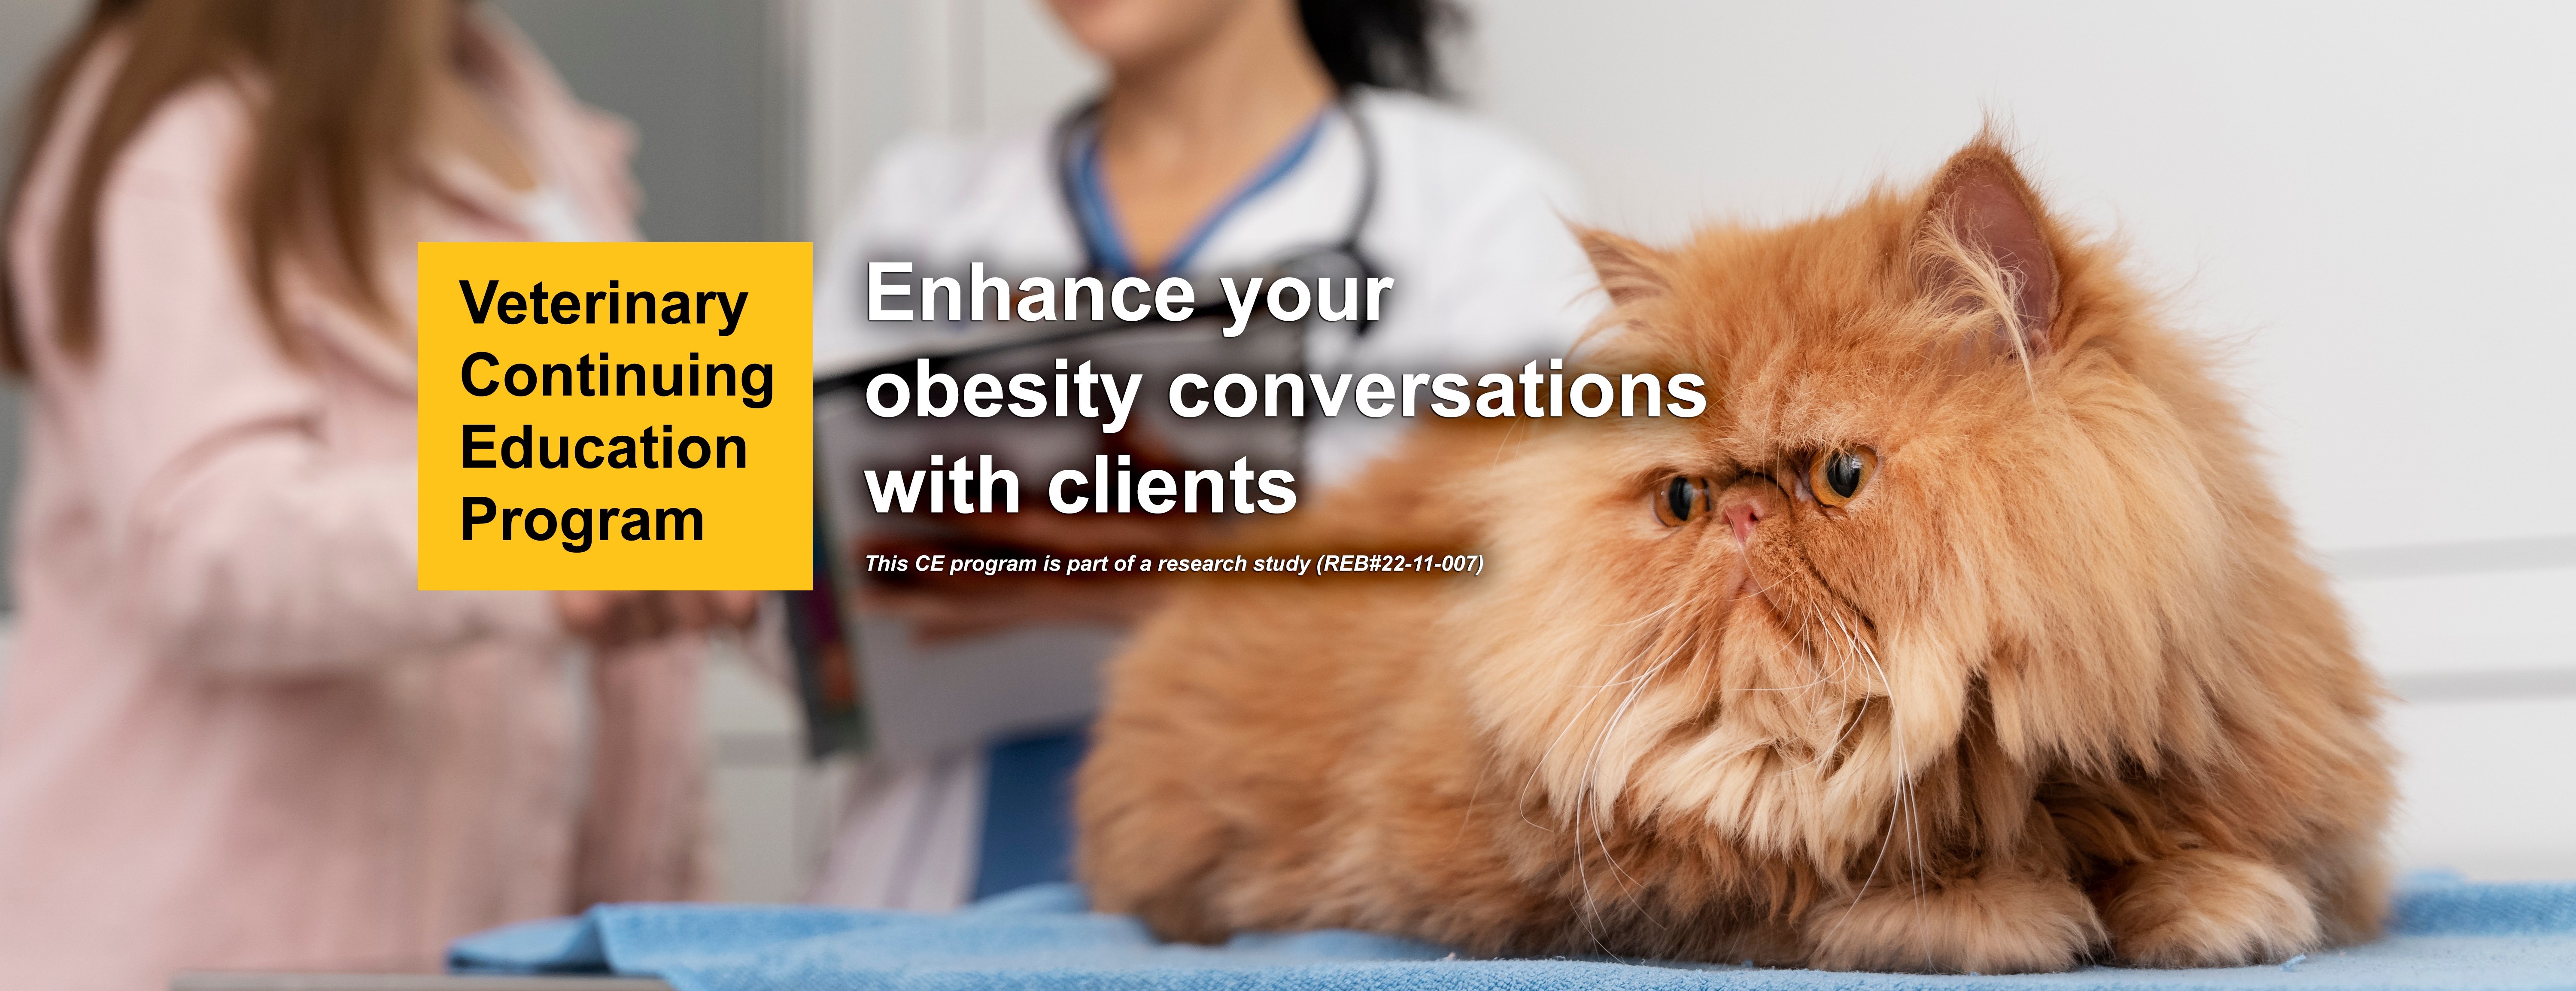 Enhance Your Obesity Conversations with Clients